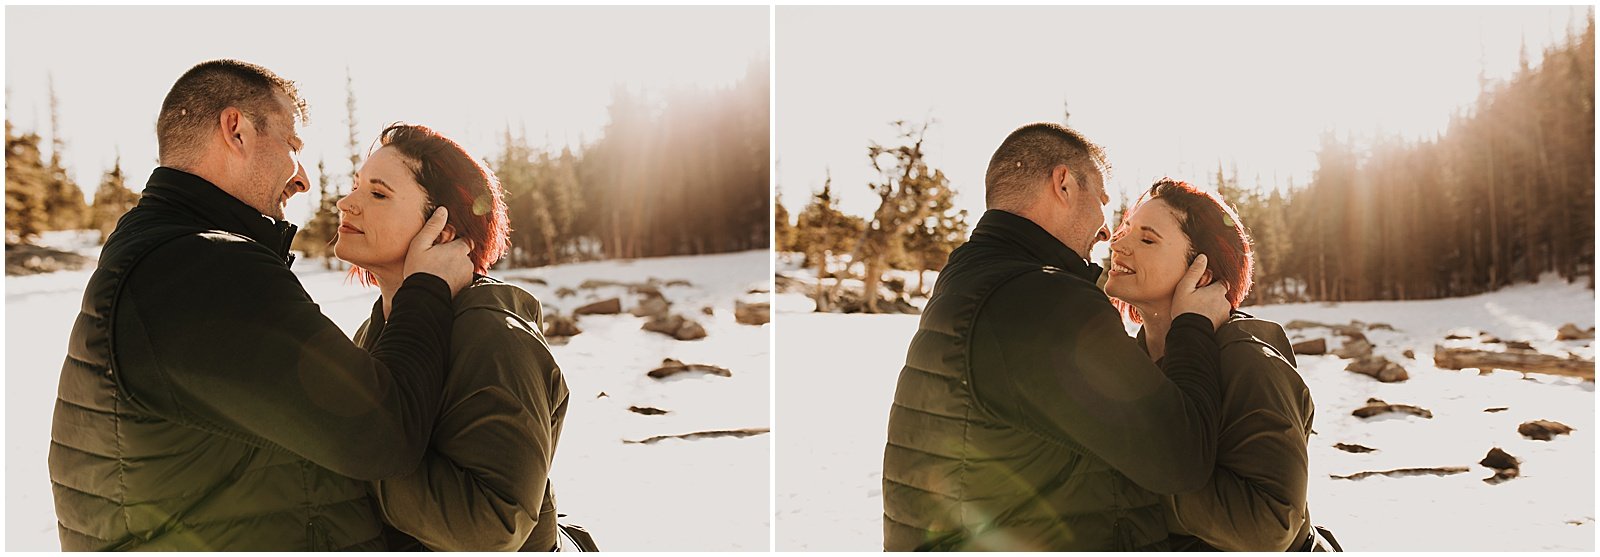 Mountain-Engagement-Photos-AndreaWagnerPhotography_0073.jpg